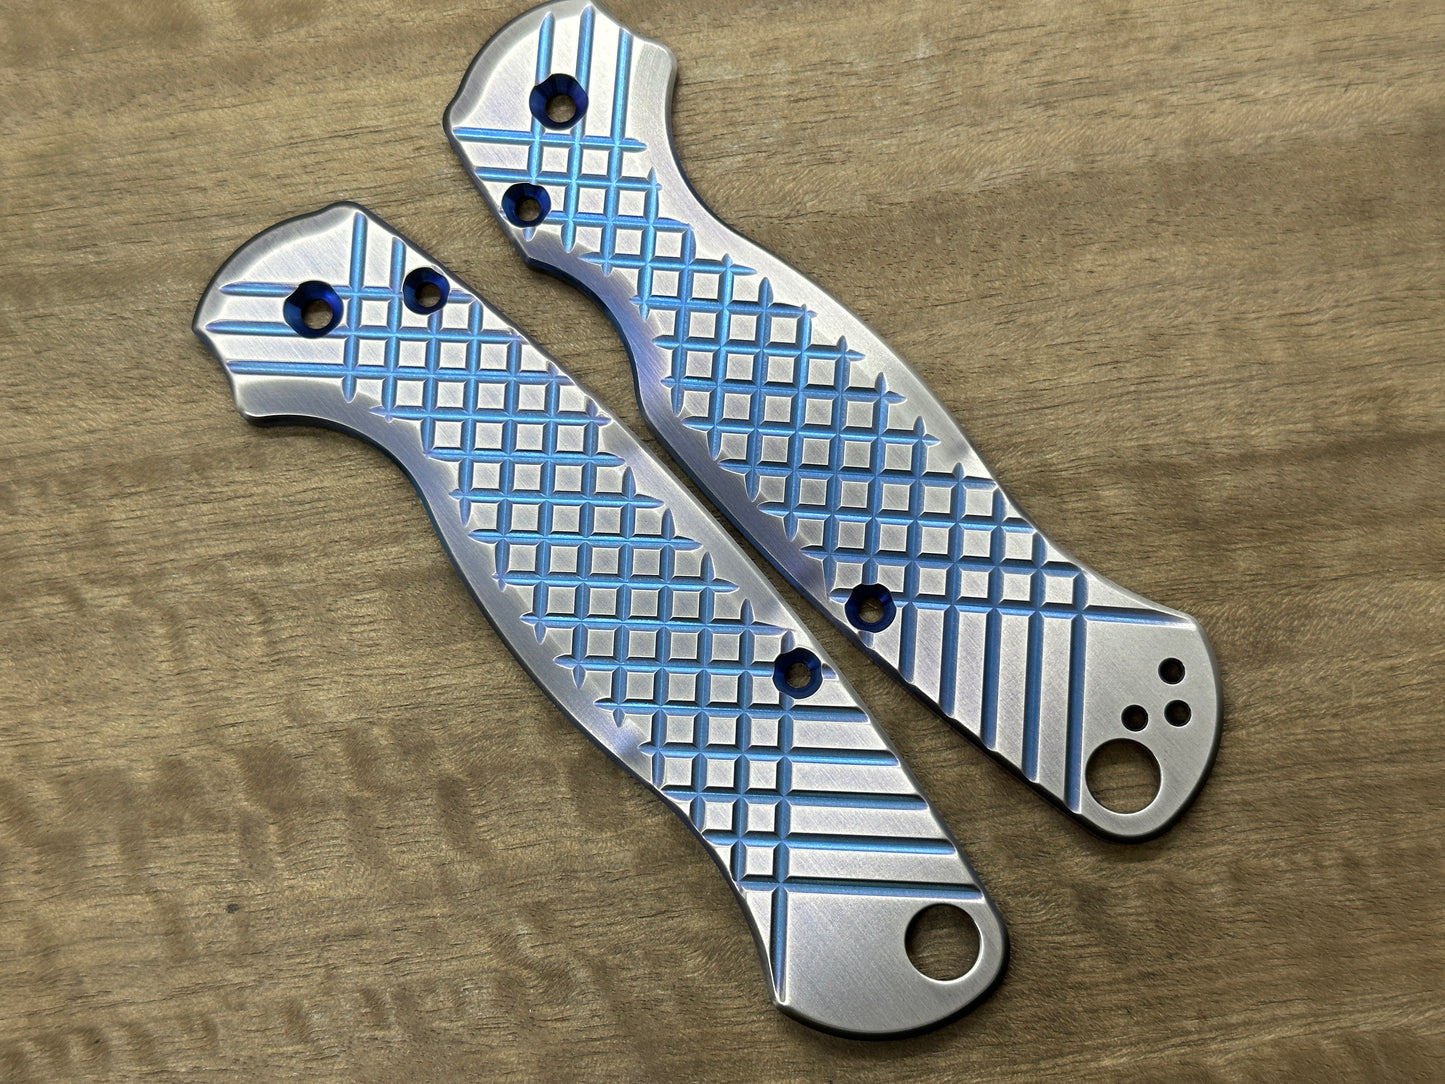 2-Tone BLUE ano & Brushed FRAG Titanium scales for Spyderco Paramilitary 2 PM2